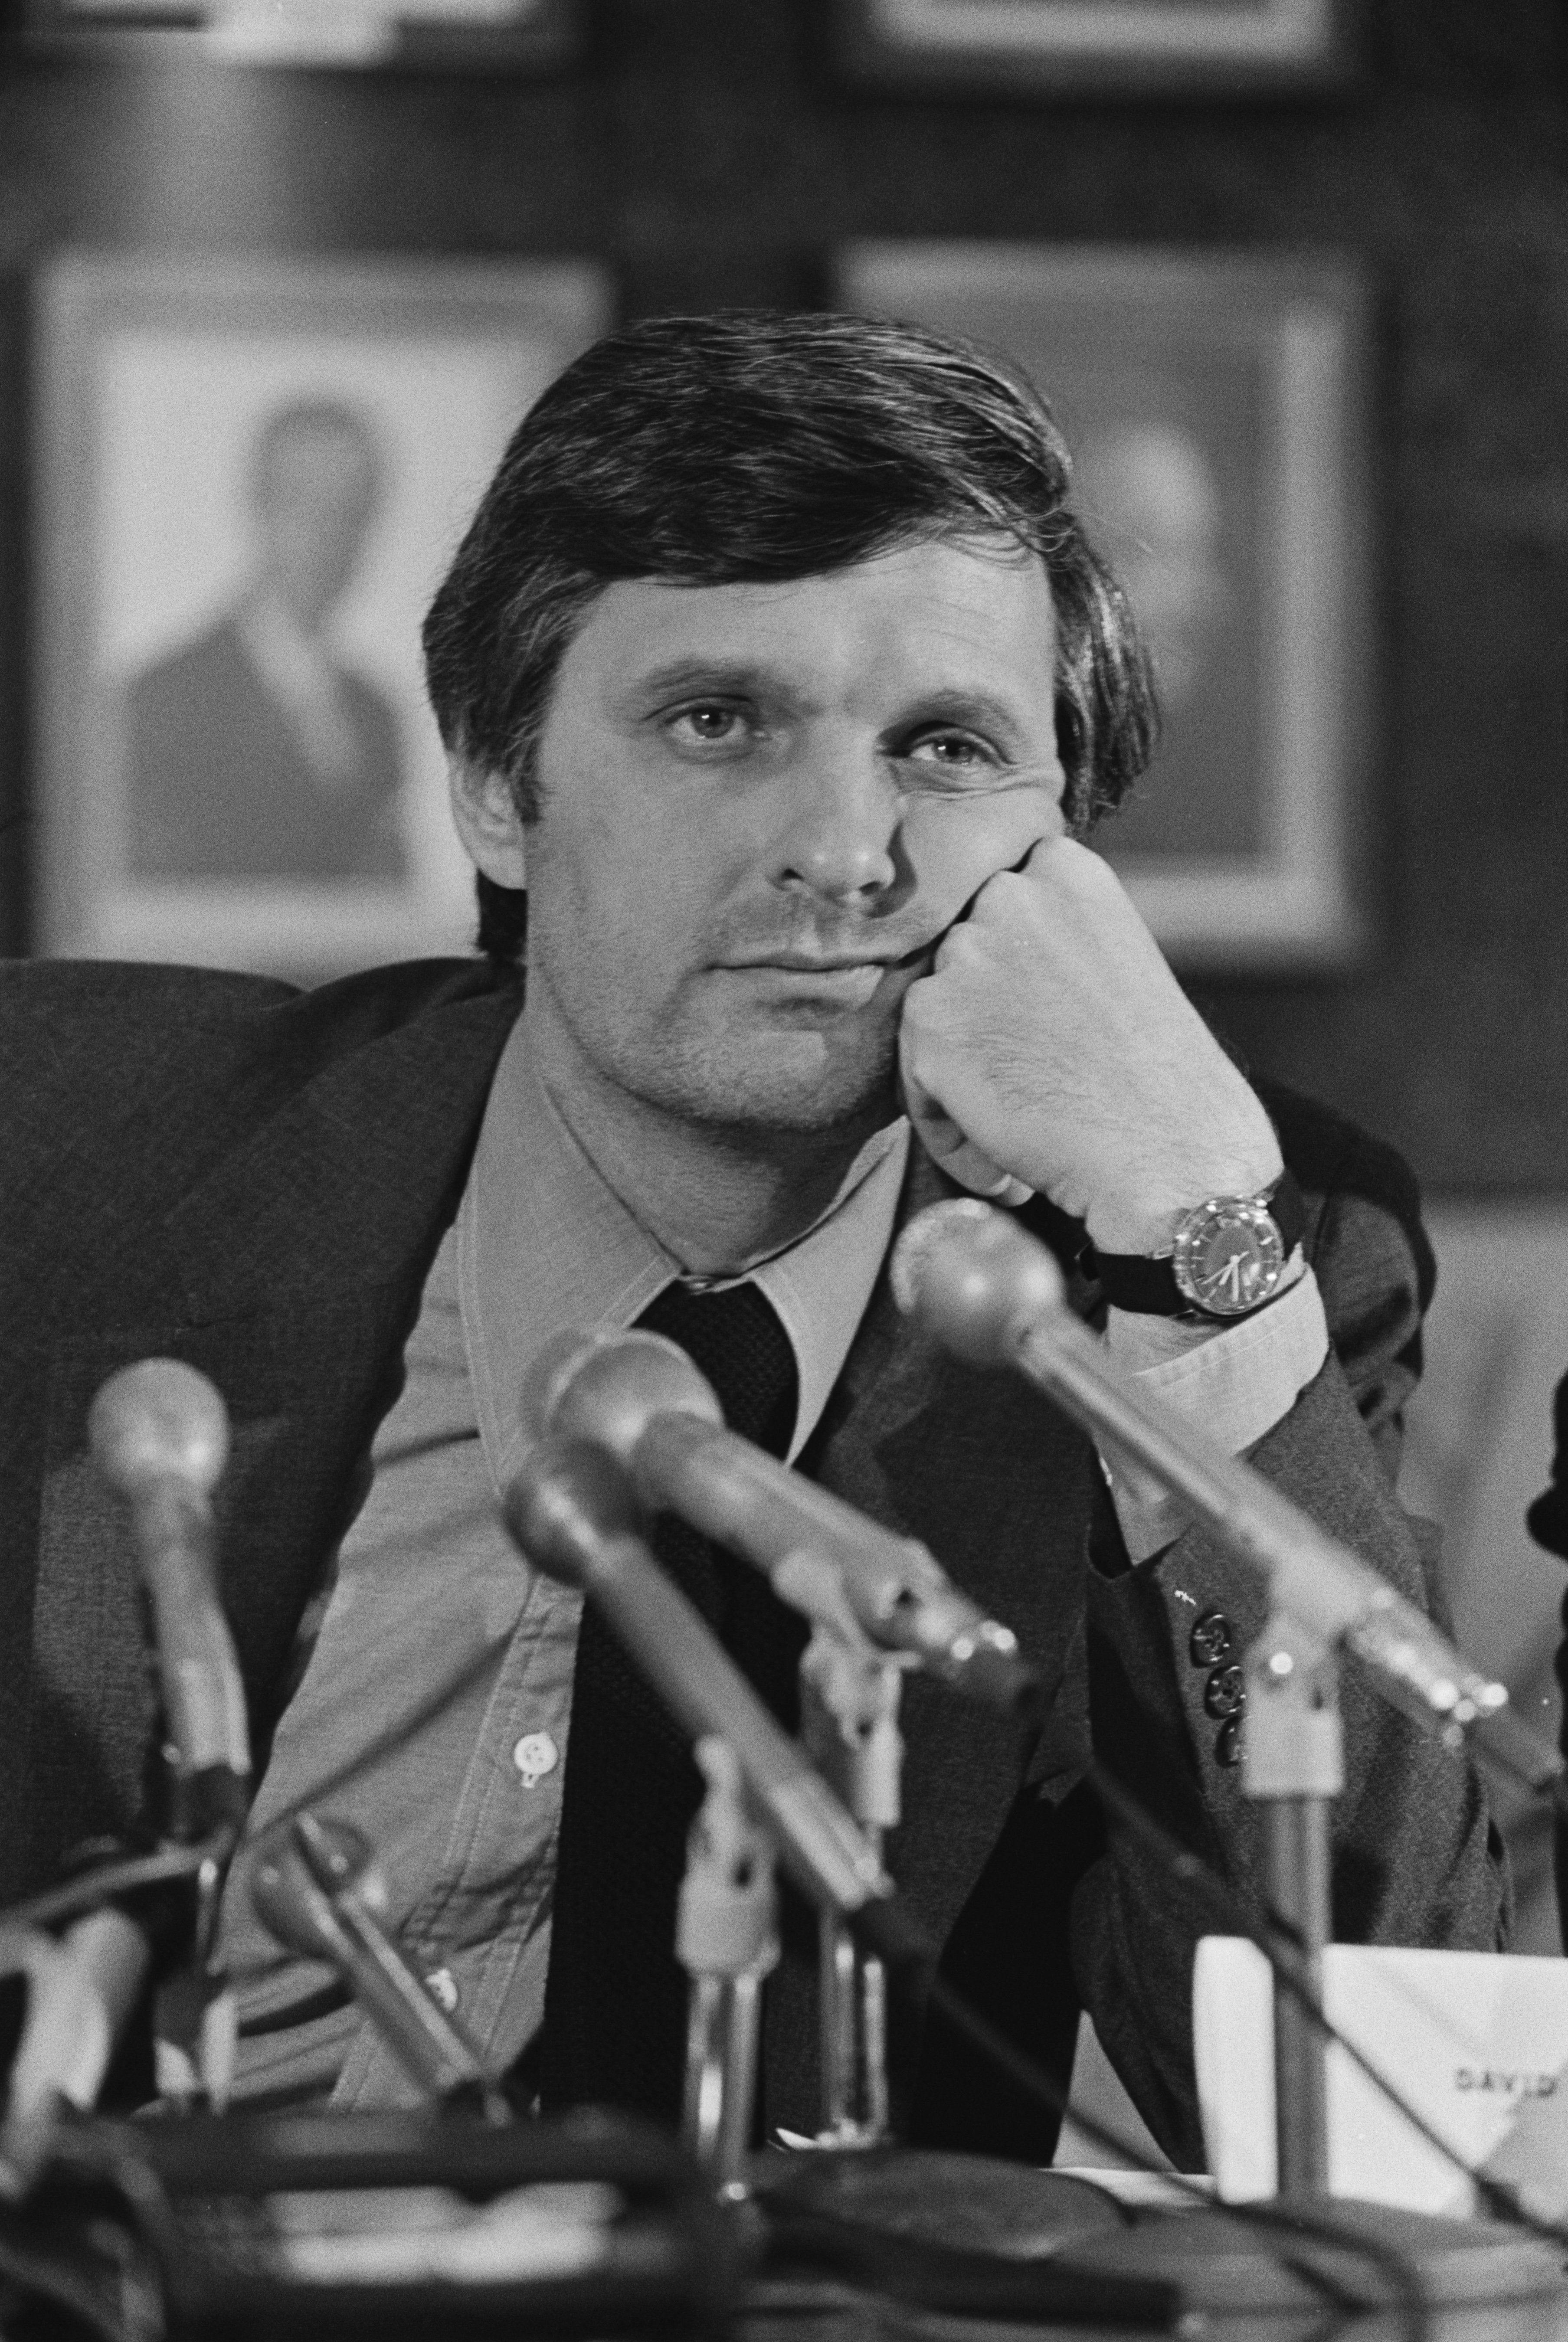 American actor Alan Alda at a press conference in Los Angeles to announce the filing of a law suit in an attempt to abolish the family viewing hour on major US television networks on October 30, 1975. | Source: Getty Images